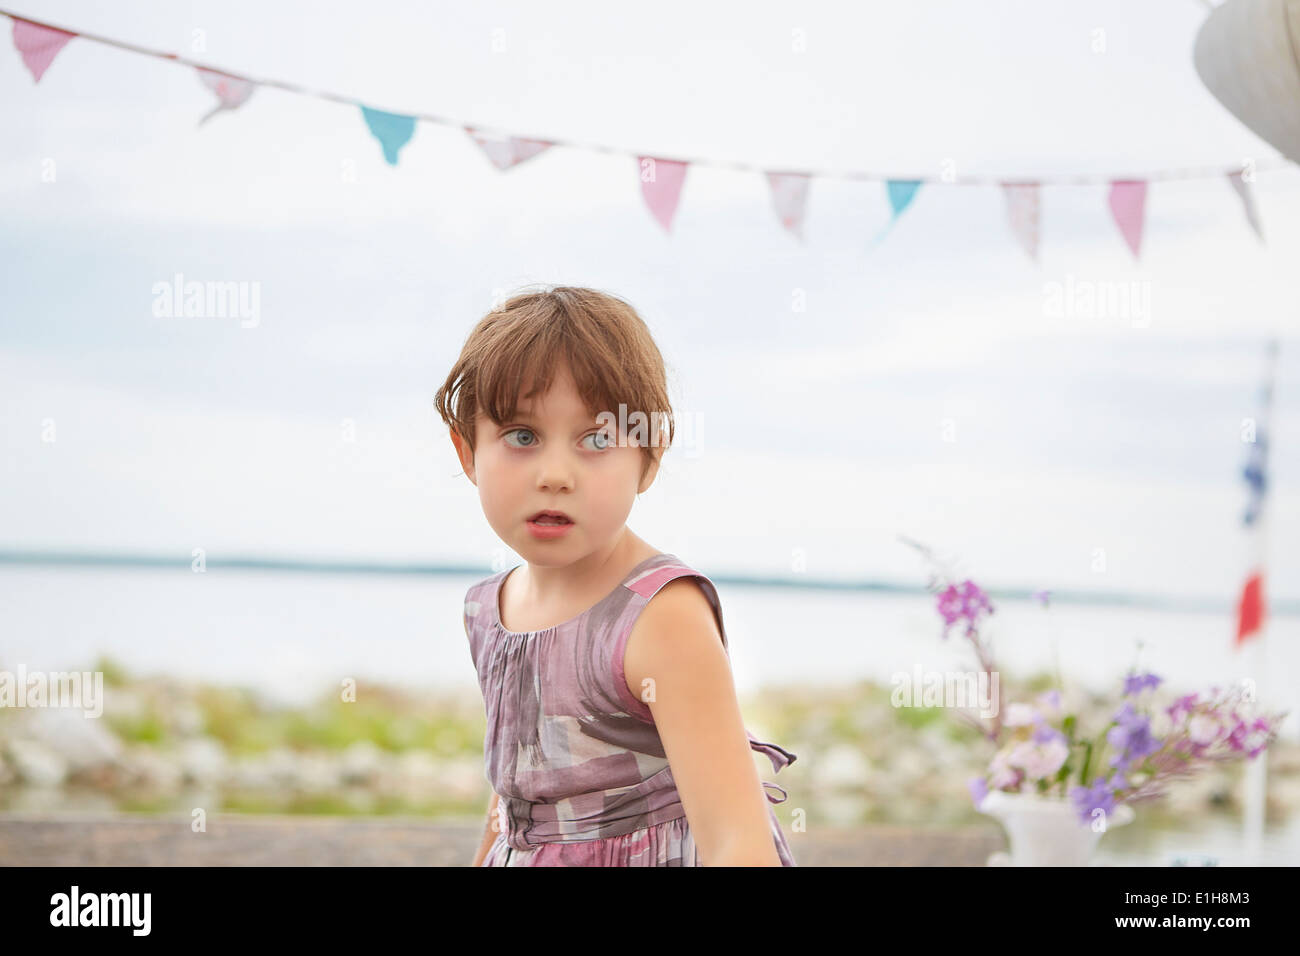 Candid portrait of young girl at party Stock Photo